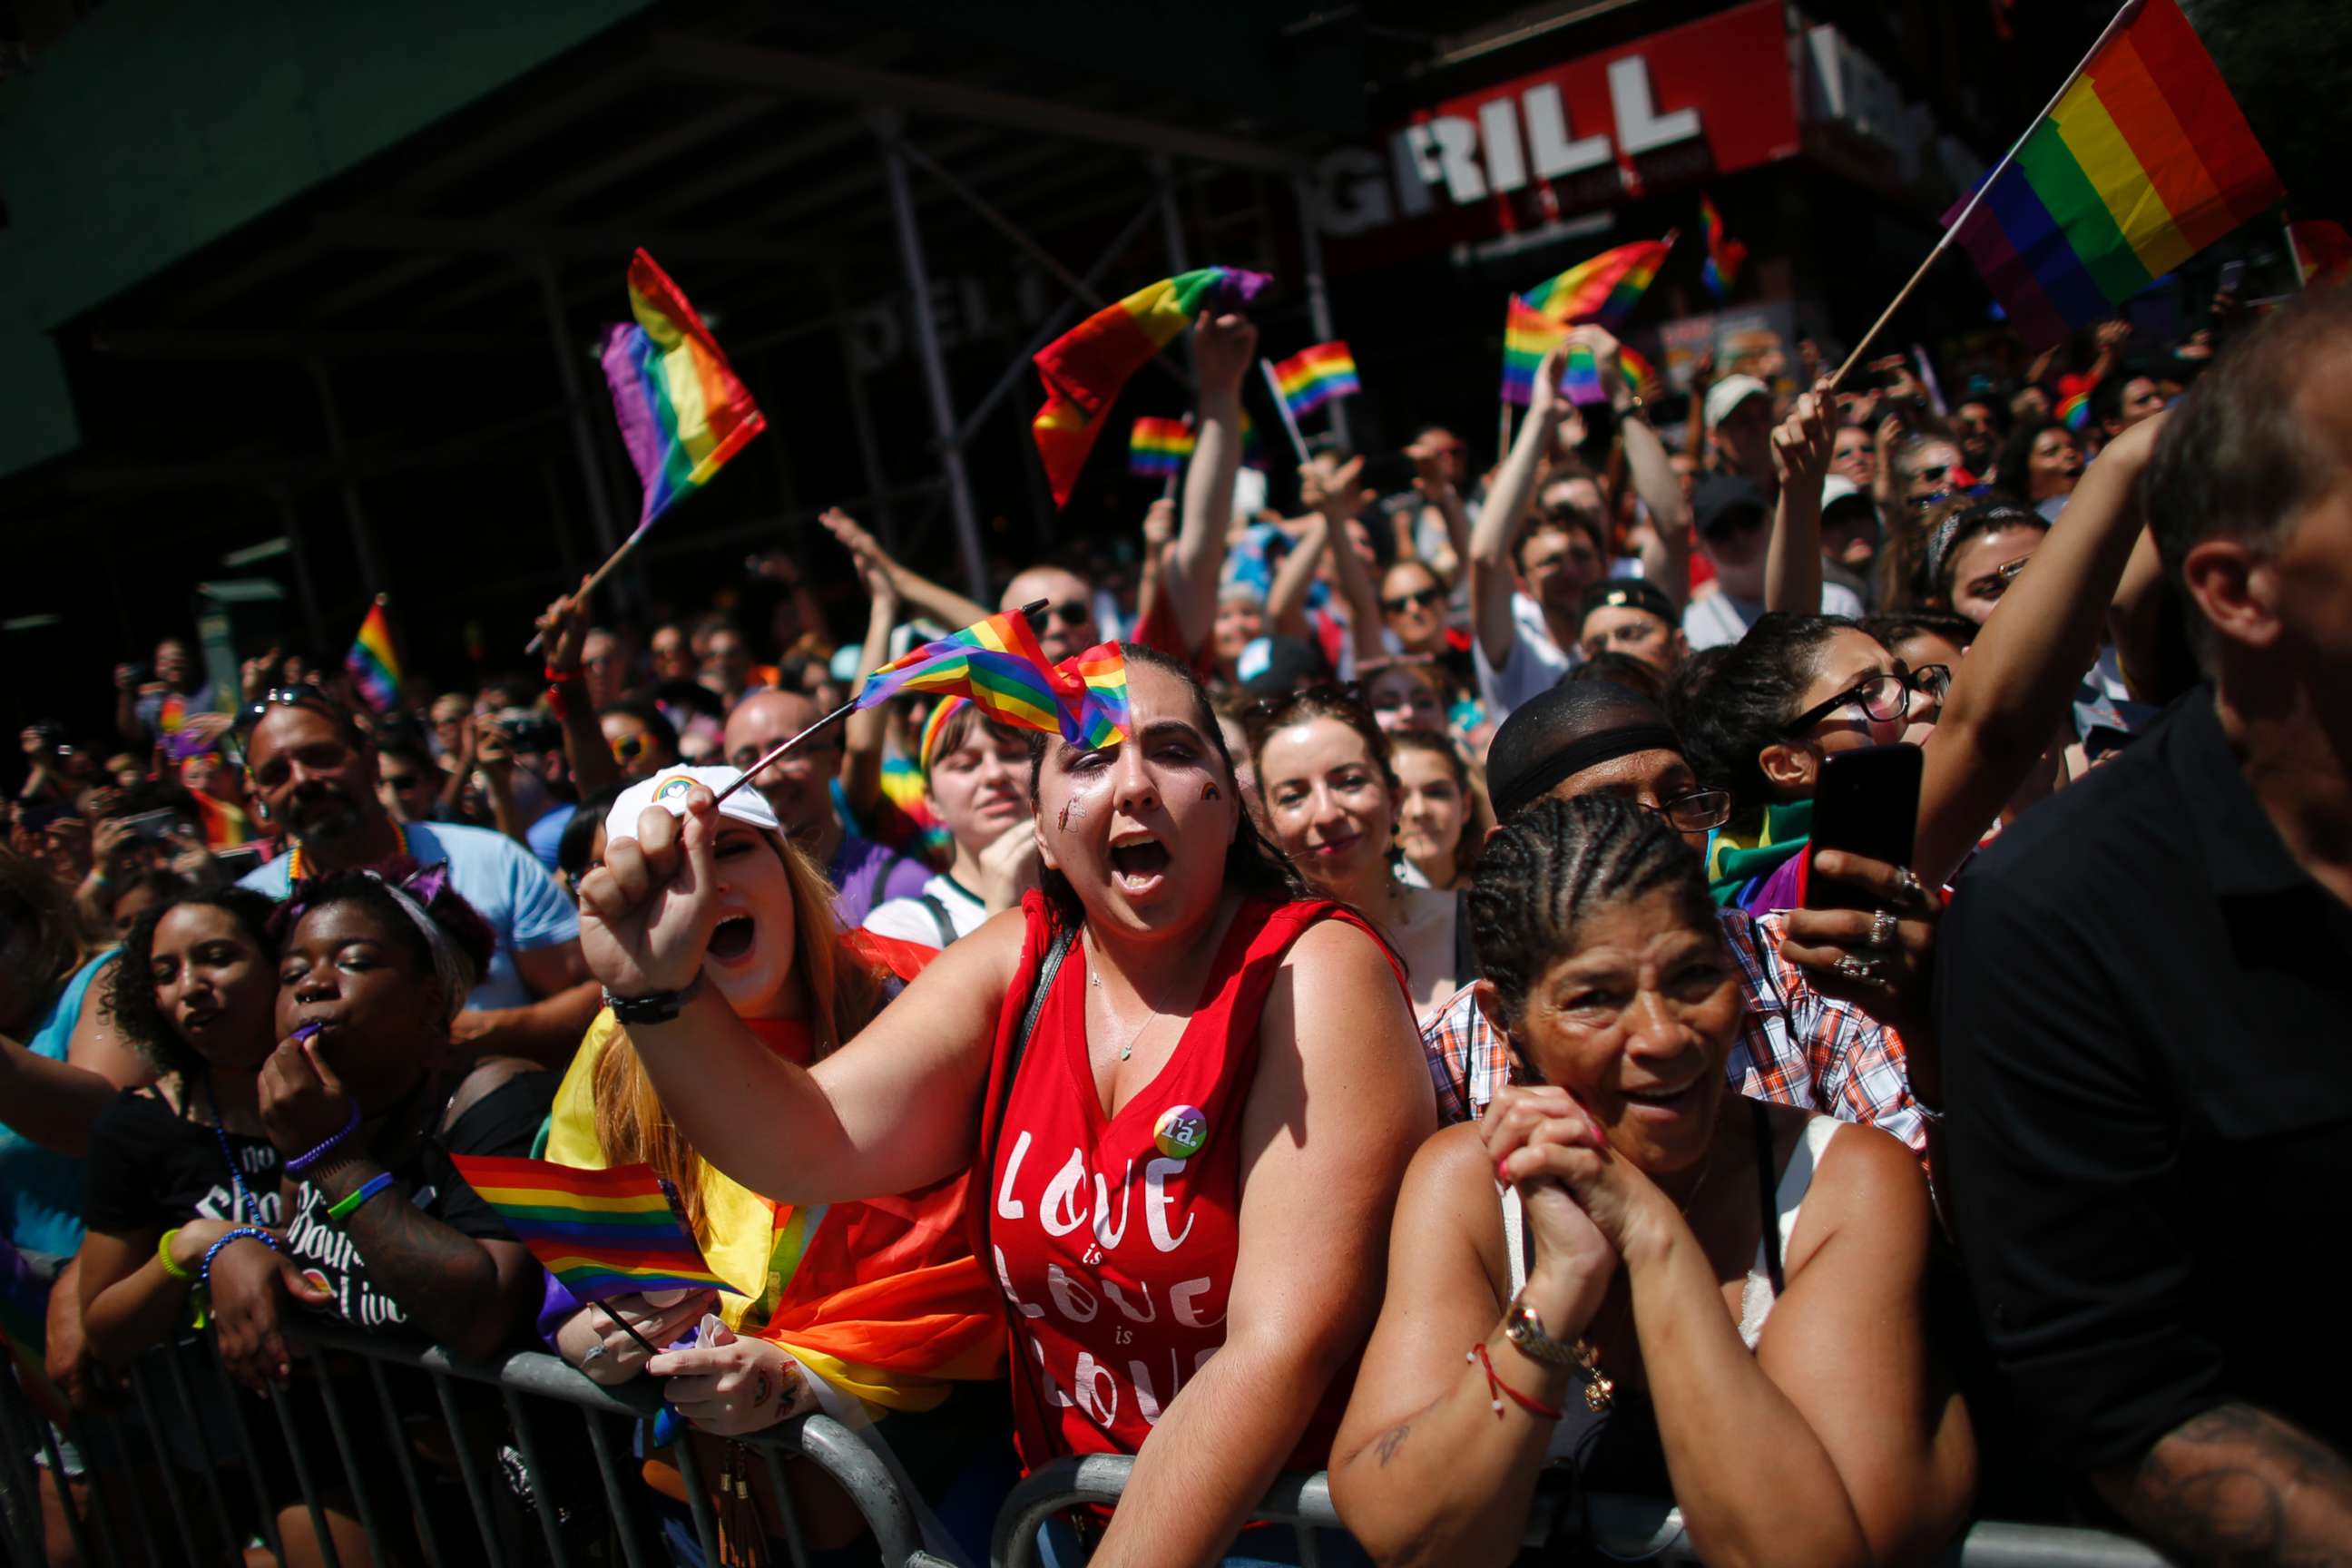 PHOTO: Revellers standing on Seventh Avenue watch the annual Pride Parade on June 24, 2018 in New York City.